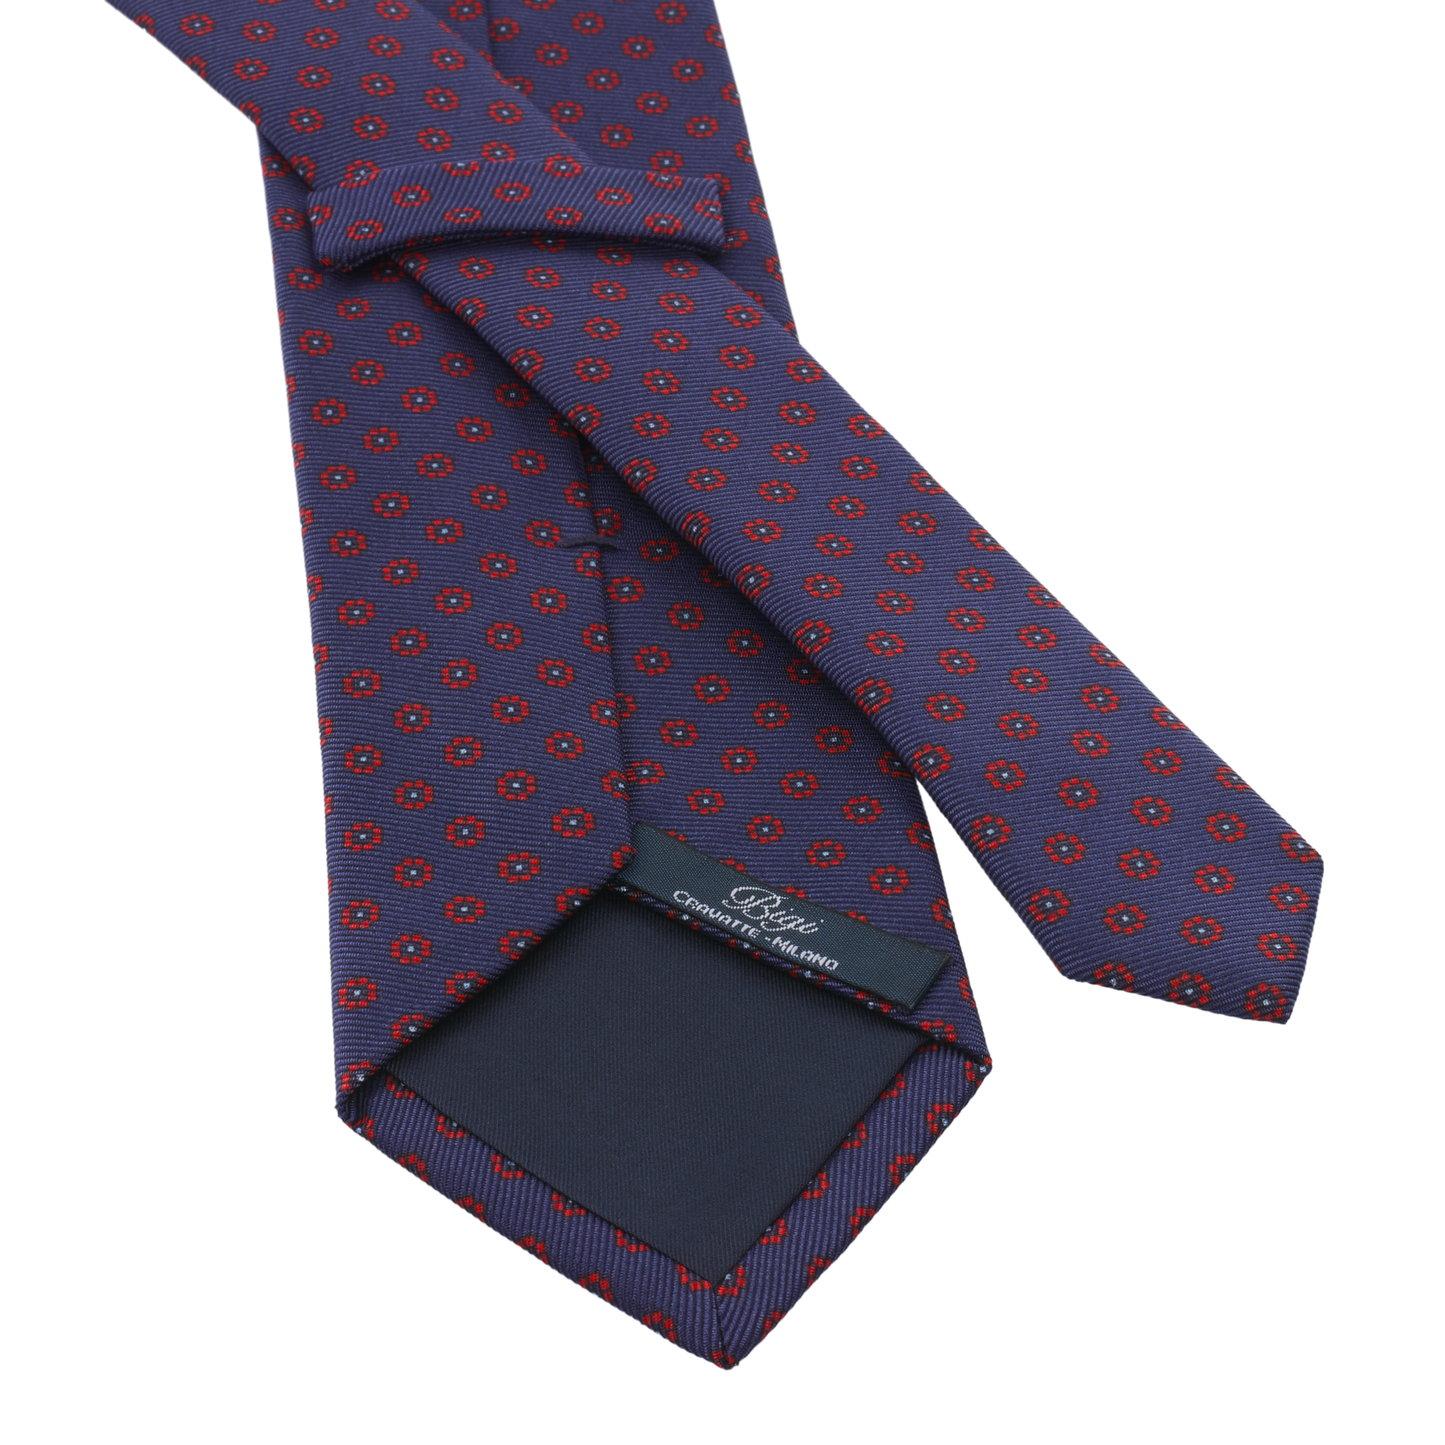 Woven Silk Lined Tie with Flower Design